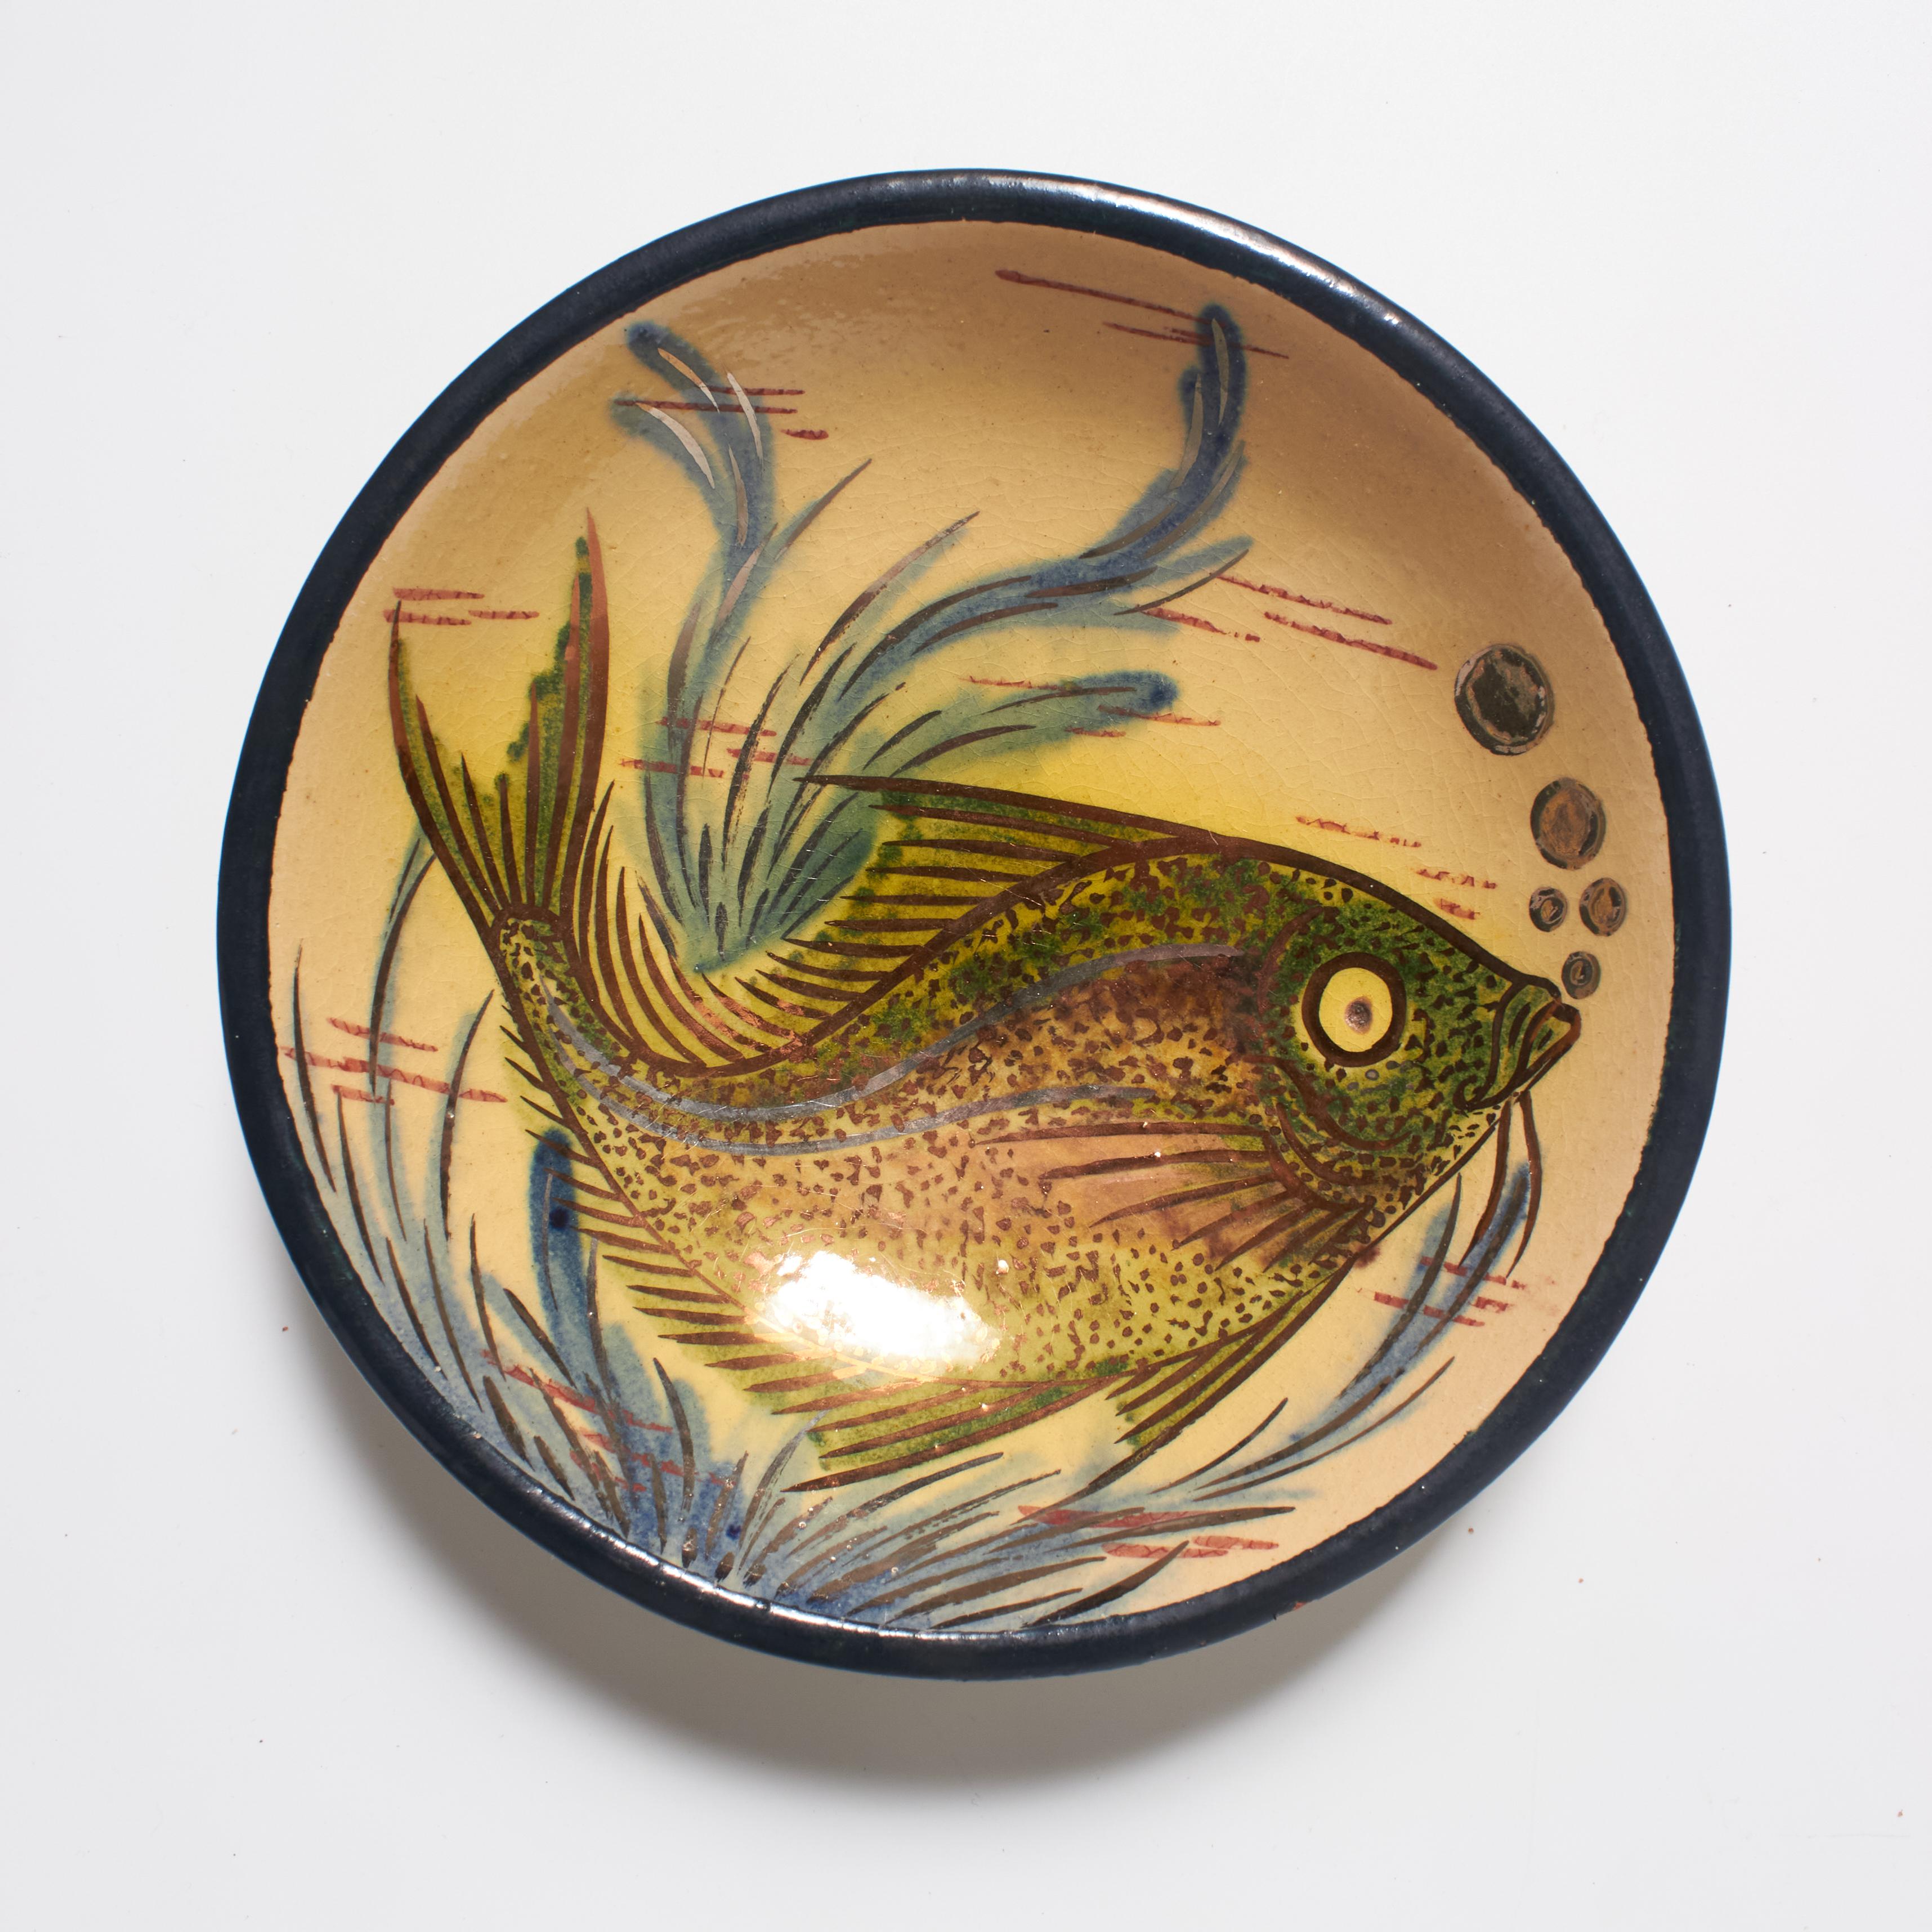 Mid-20th Century Pair of Vintage Hand-Painted Ceramic Plates by Catalan Artist Diaz Costa